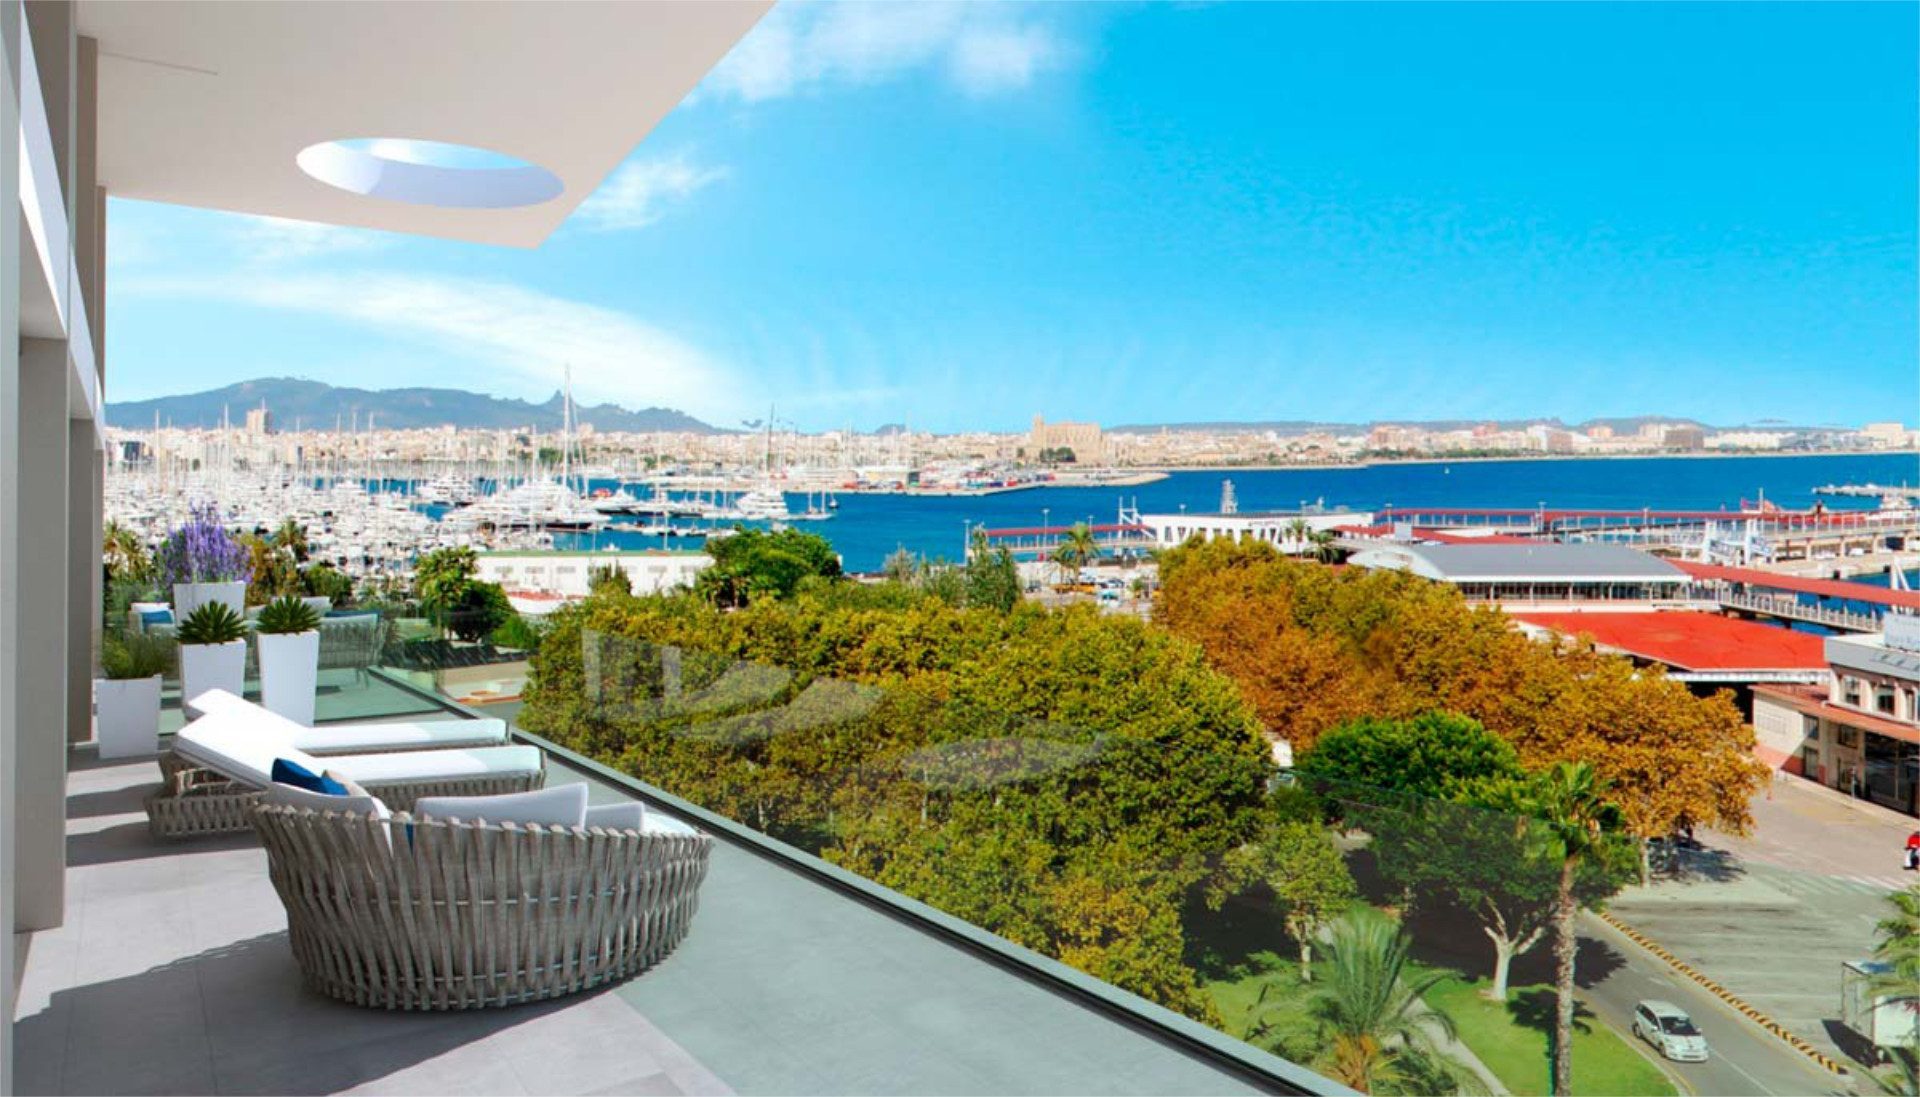 Exclusive luxury penthouse with views of the port of Palma, Mallorca